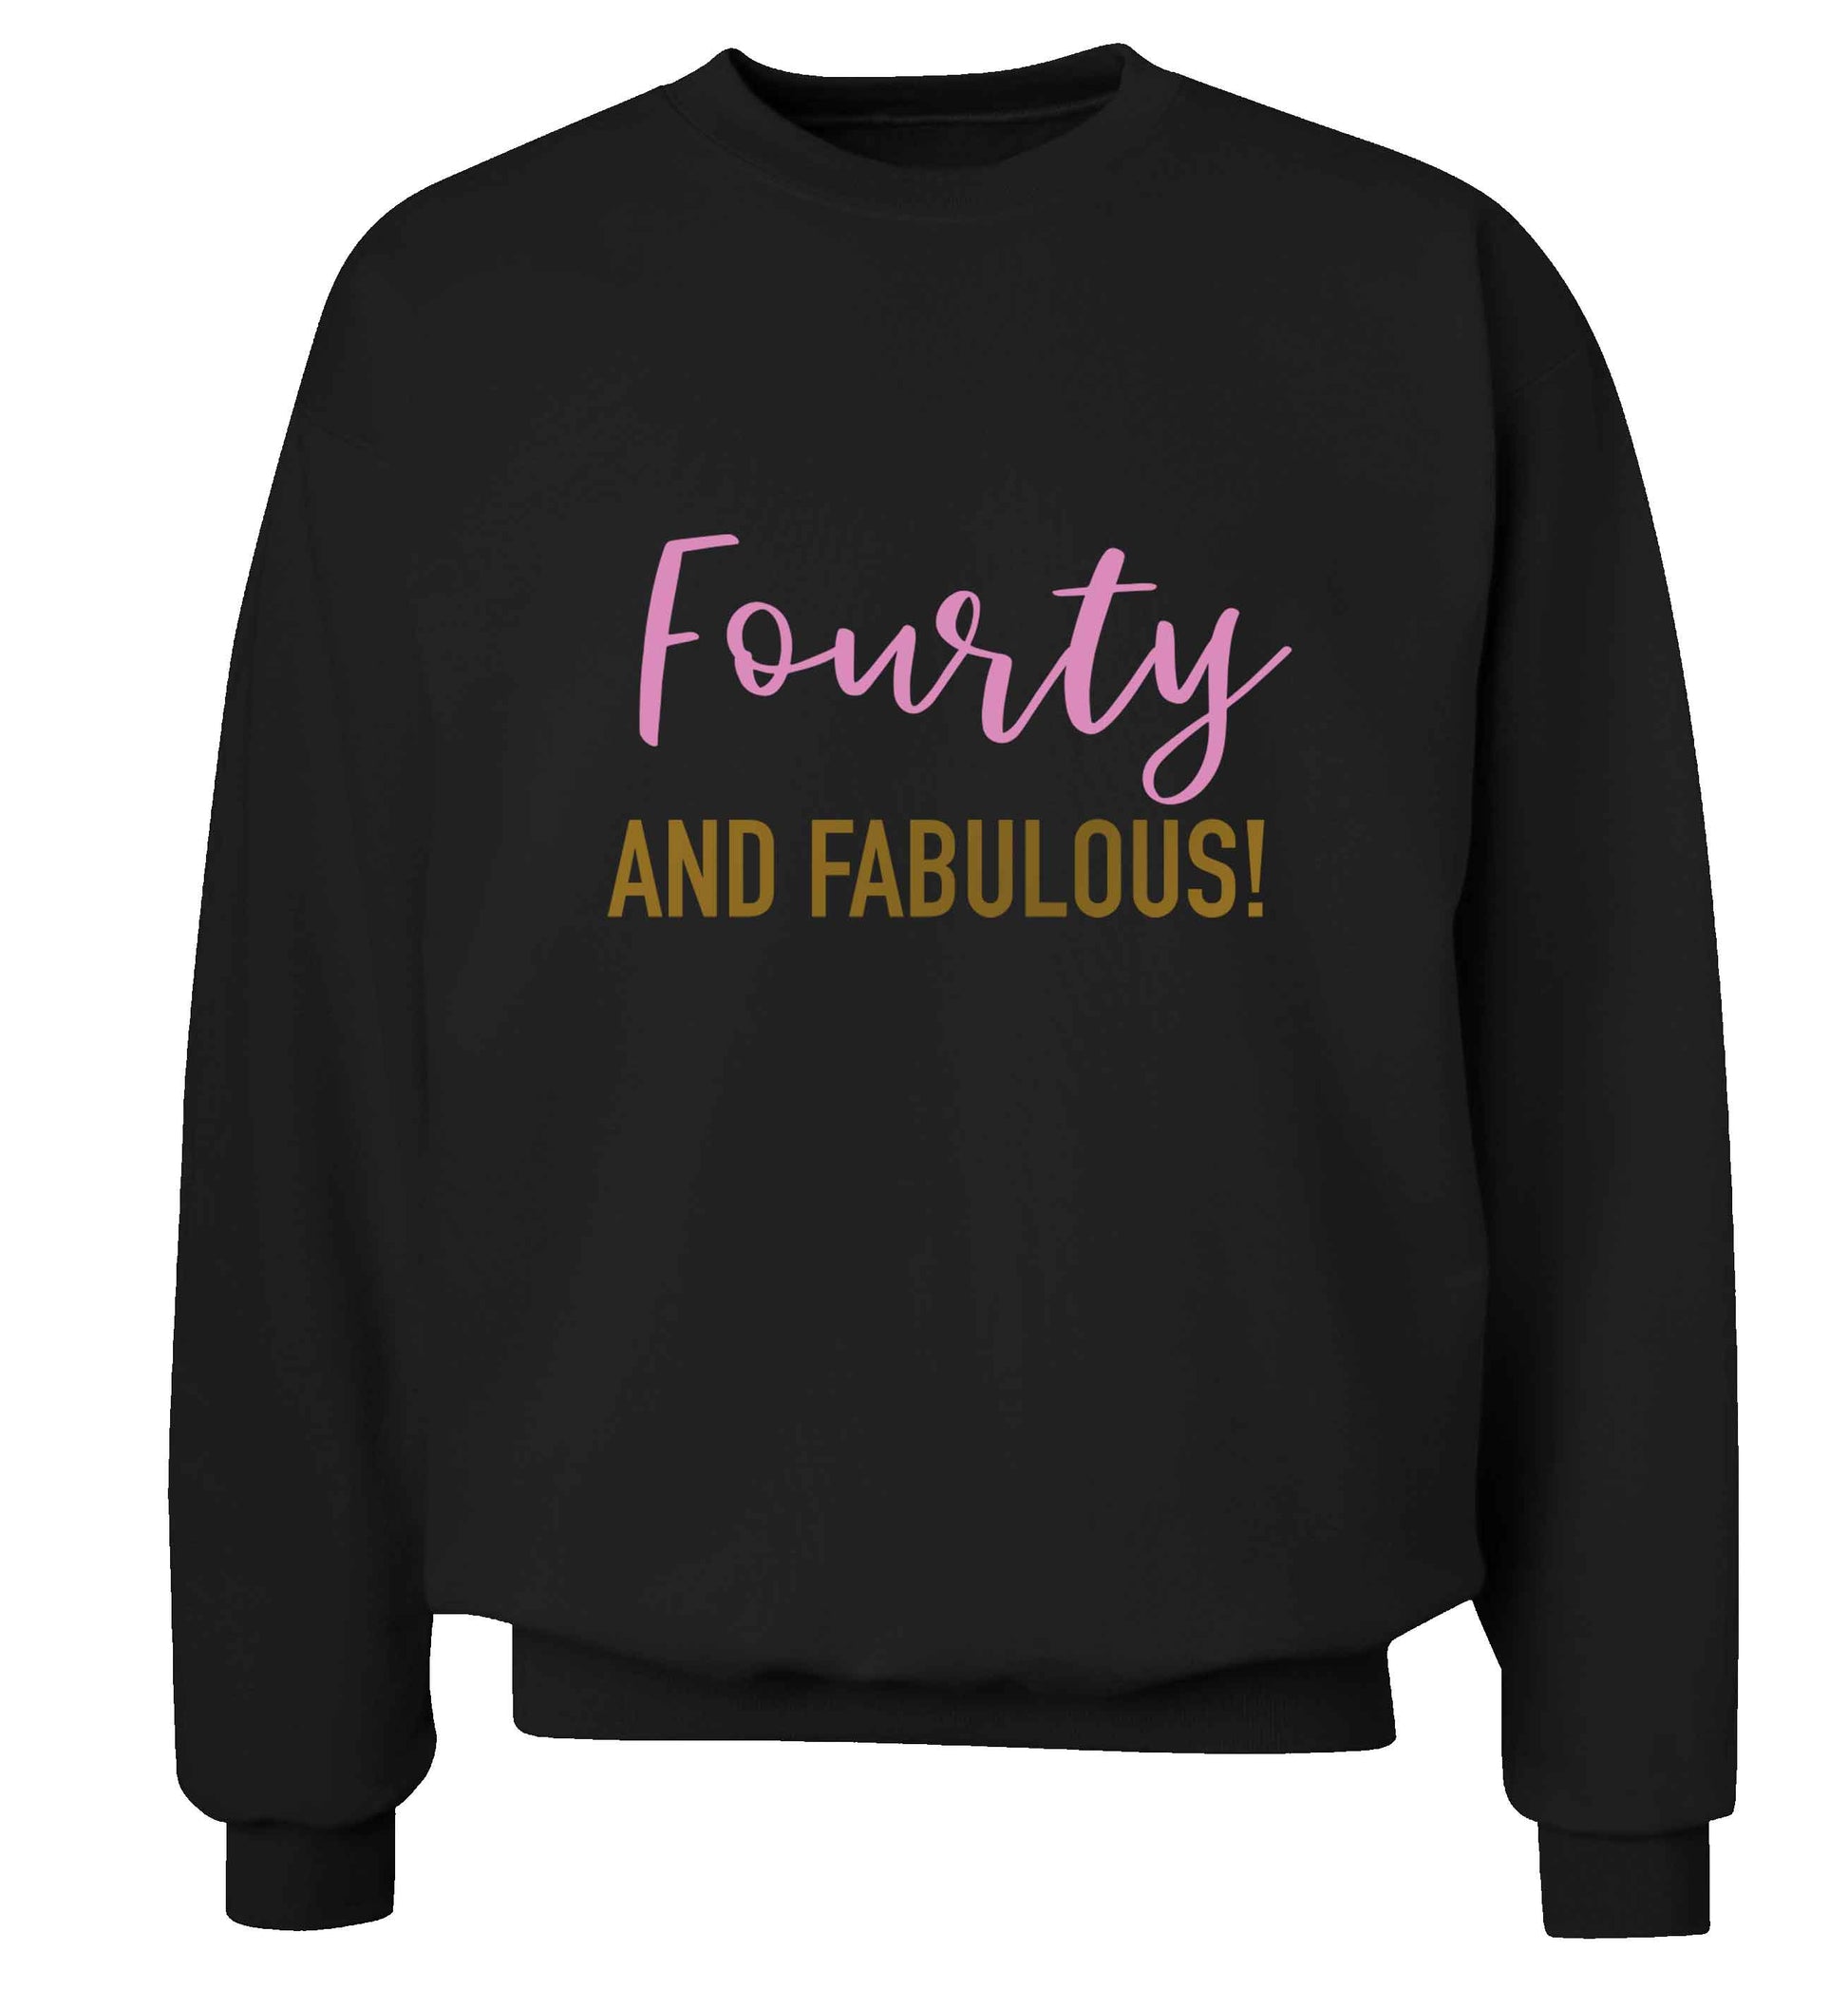 Fourty and fabulous adult's unisex black sweater 2XL